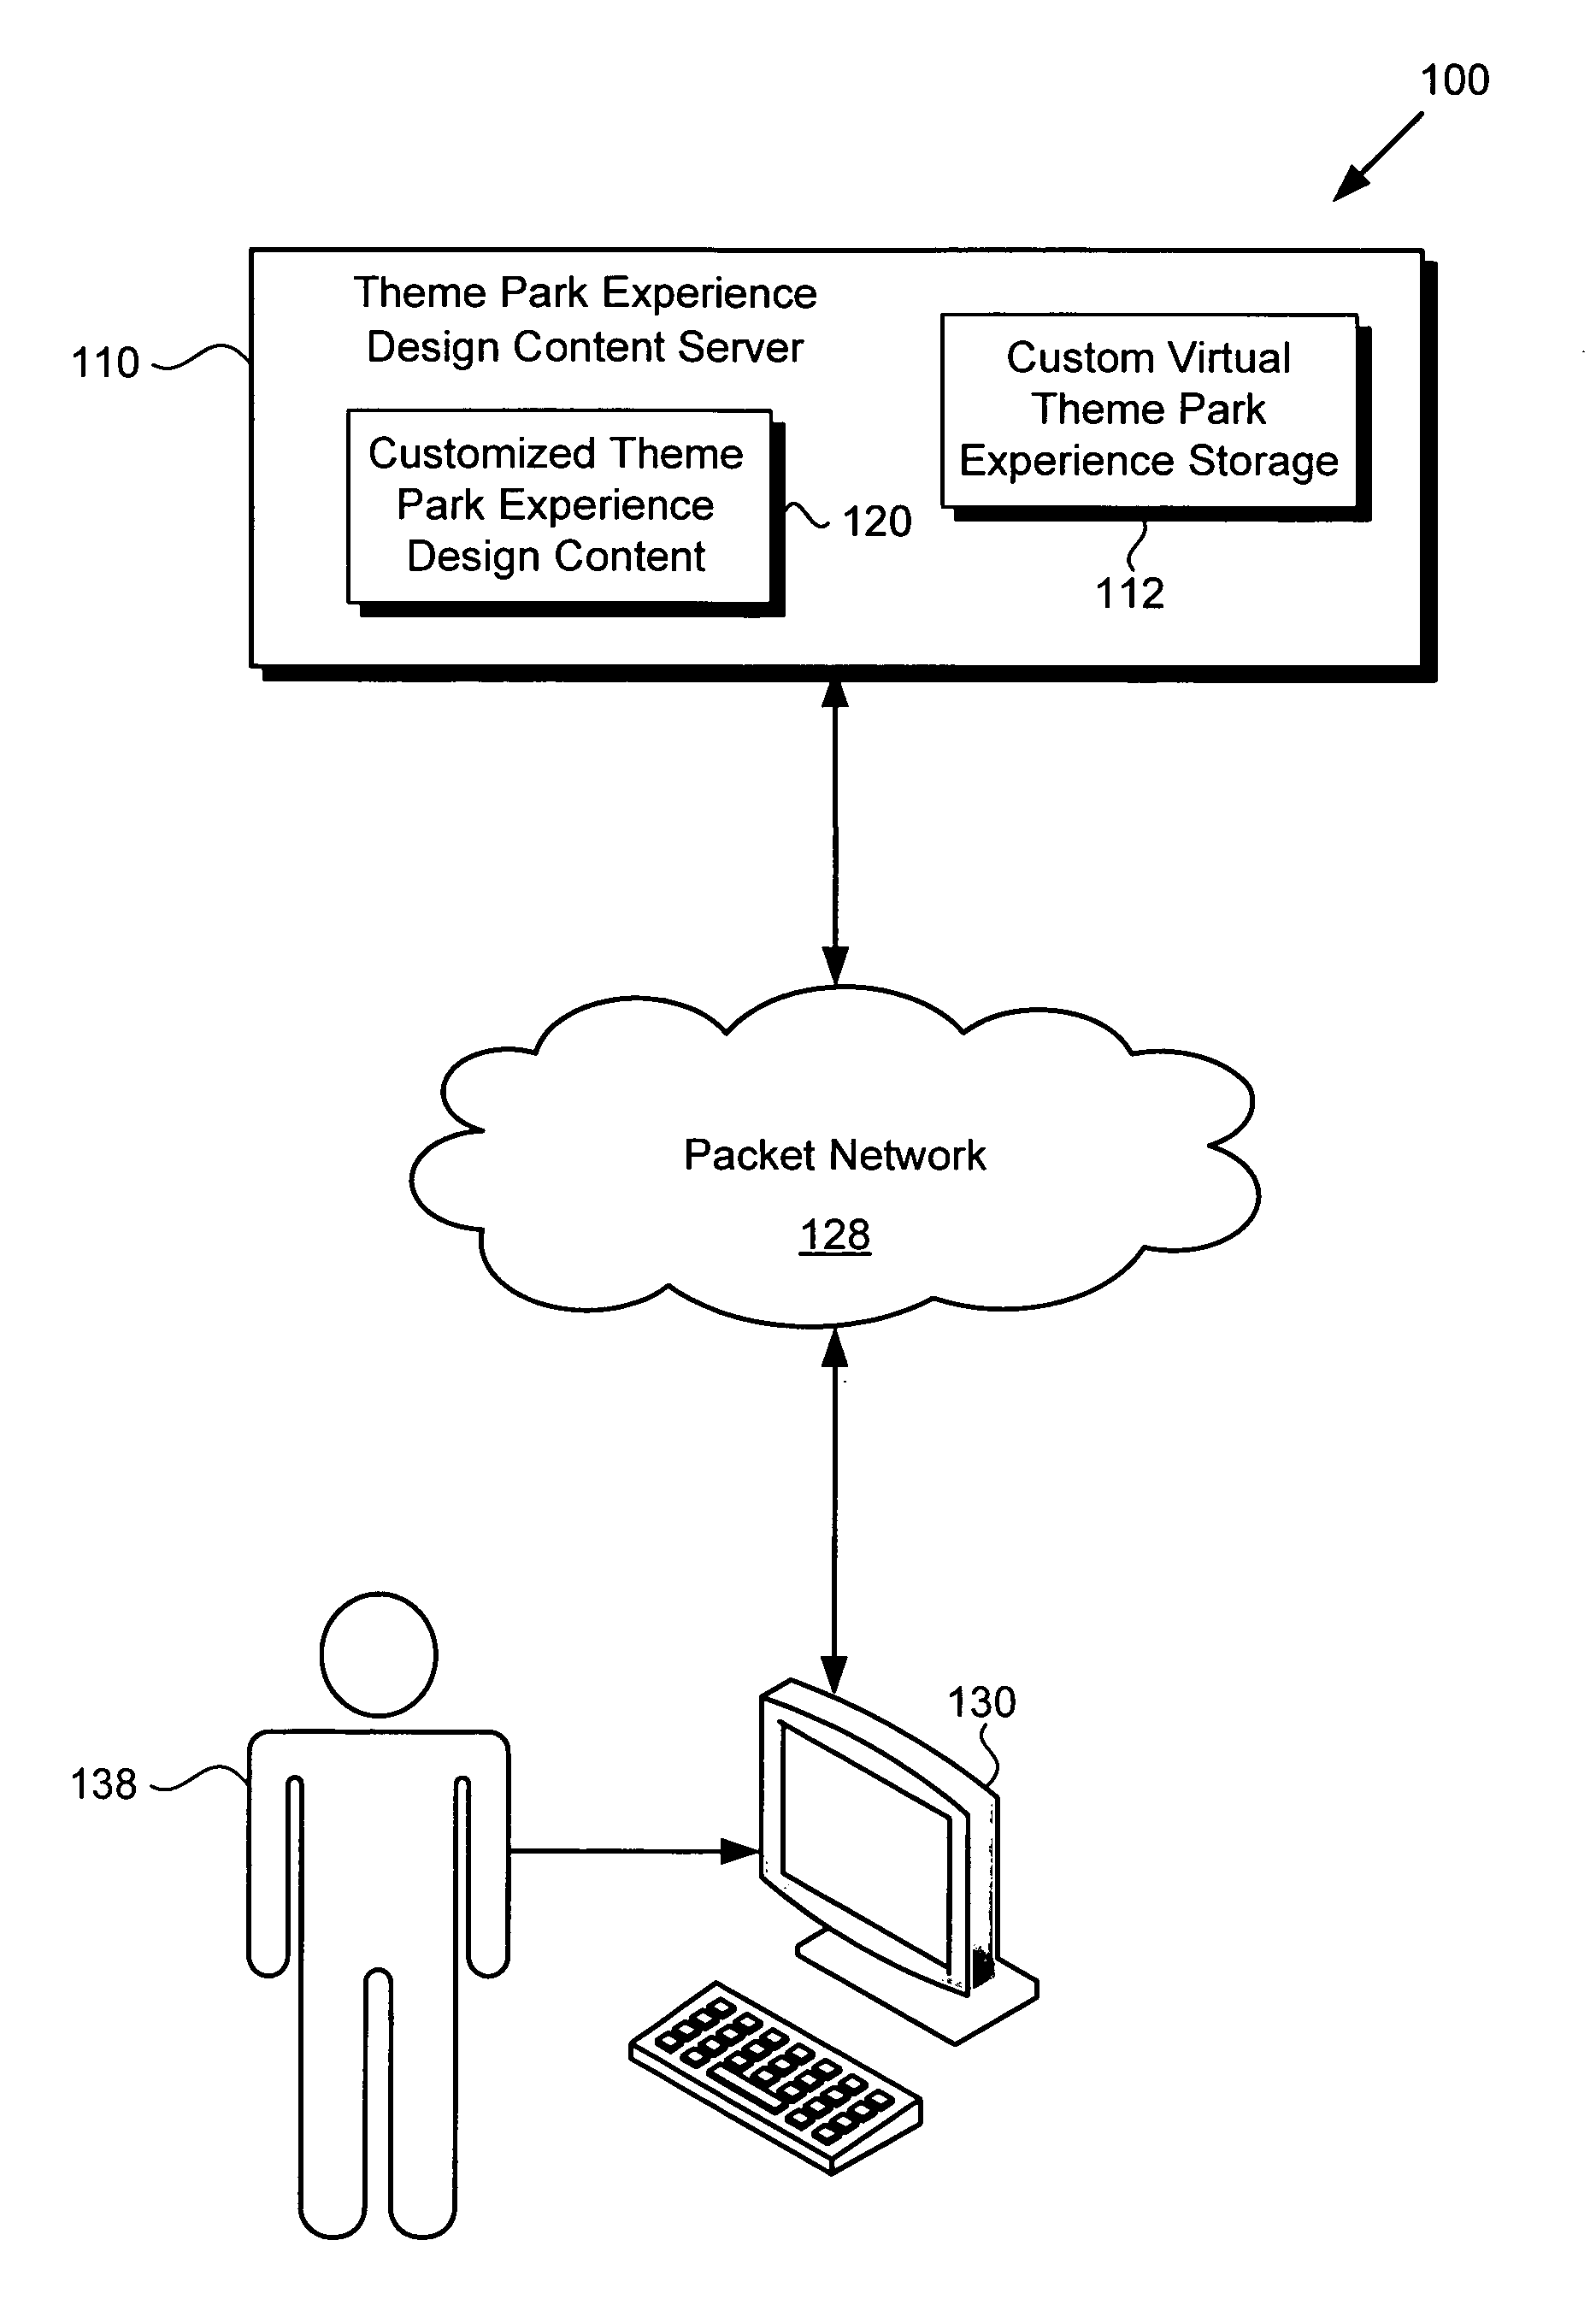 Method and system for customizing a theme park experience